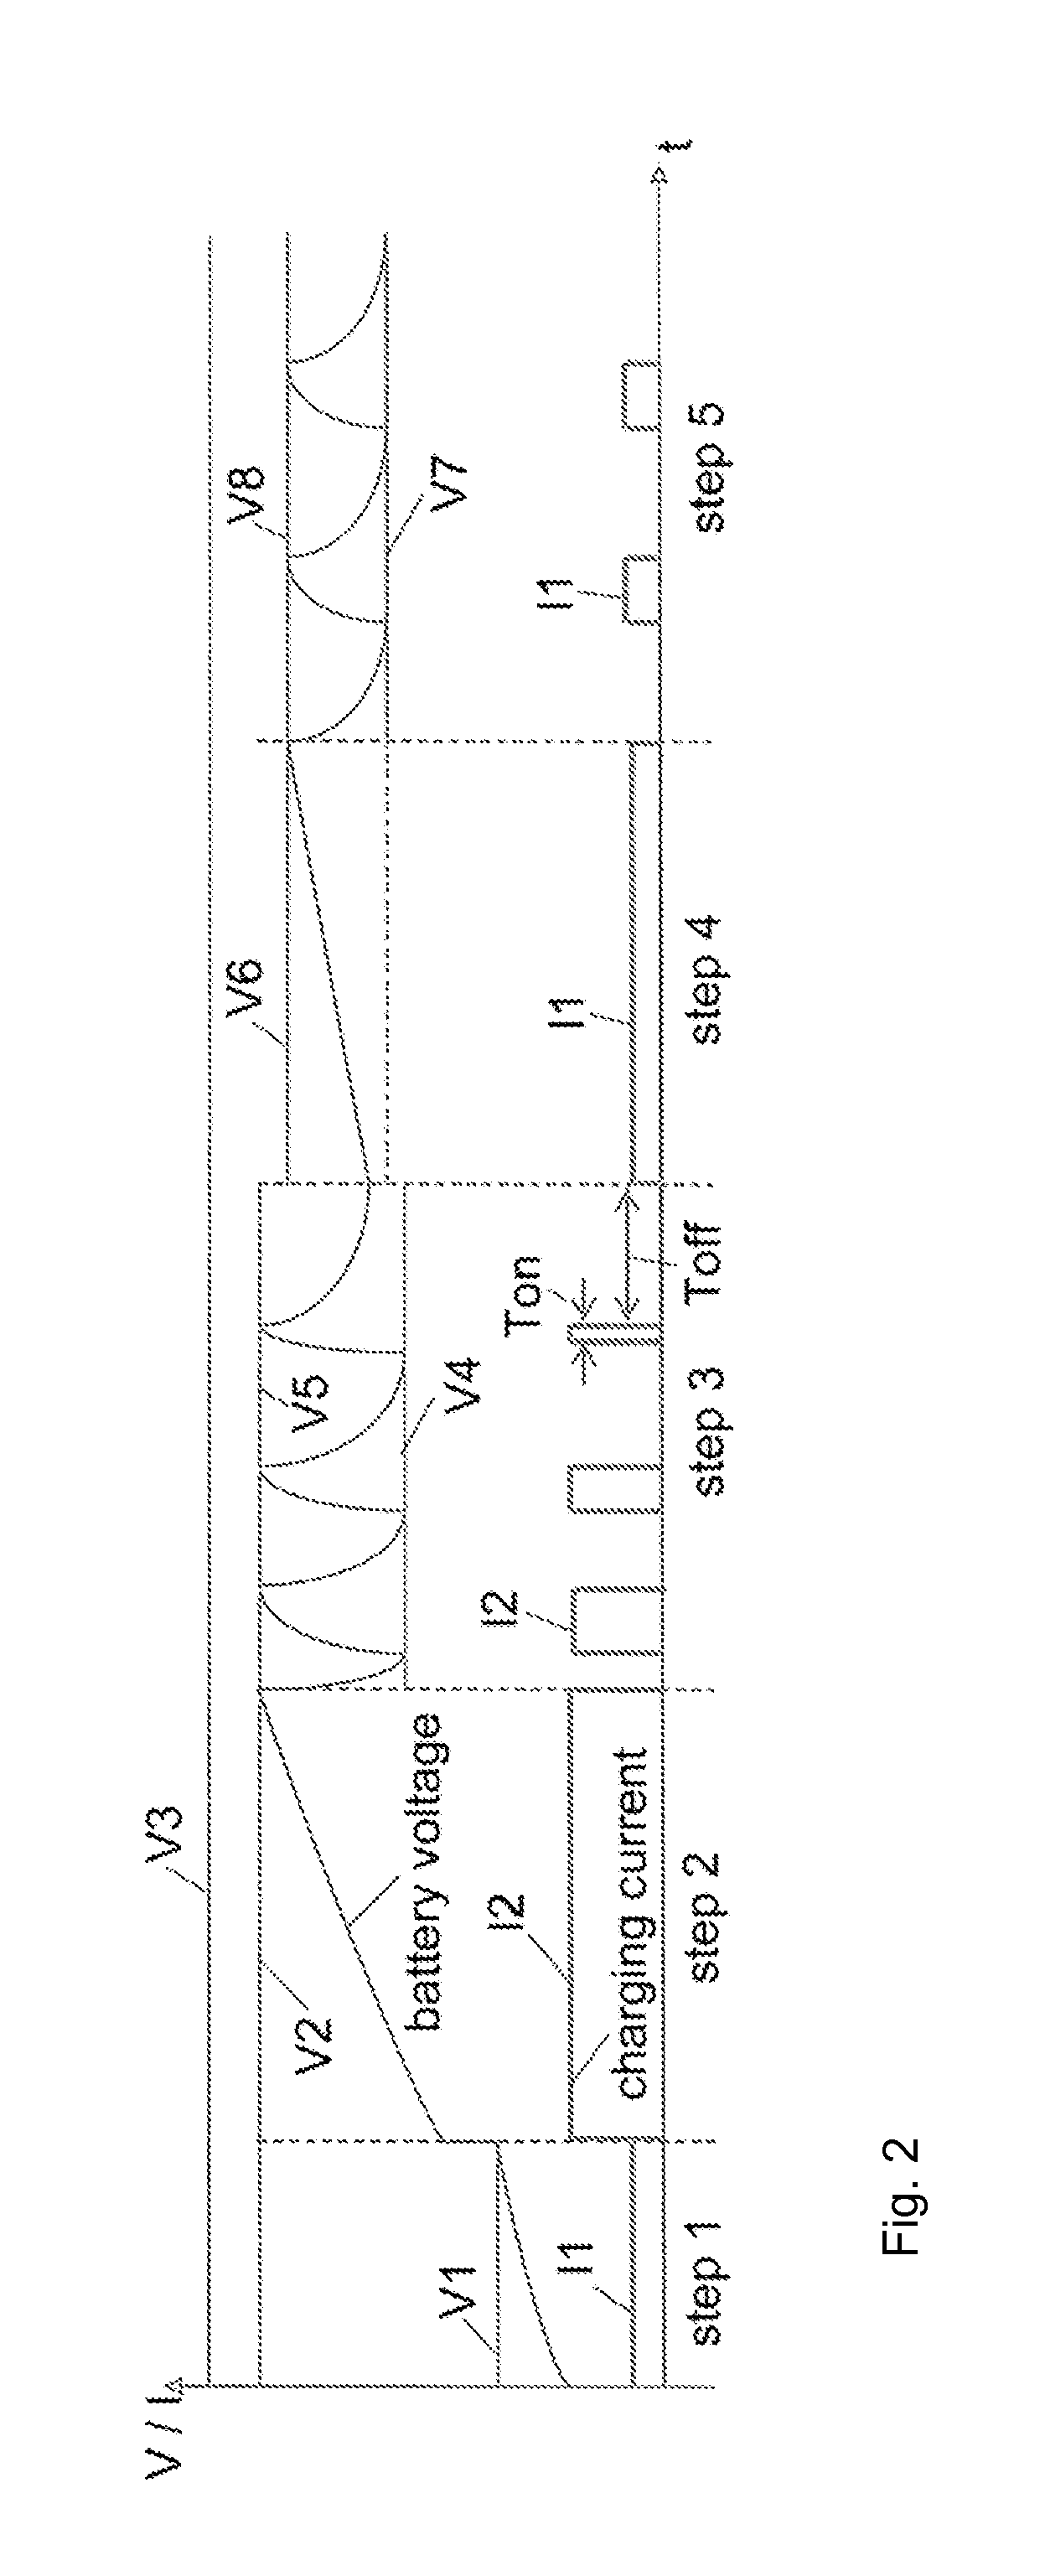 Method For Charging A Rechargeable Battery Of An Electric Device